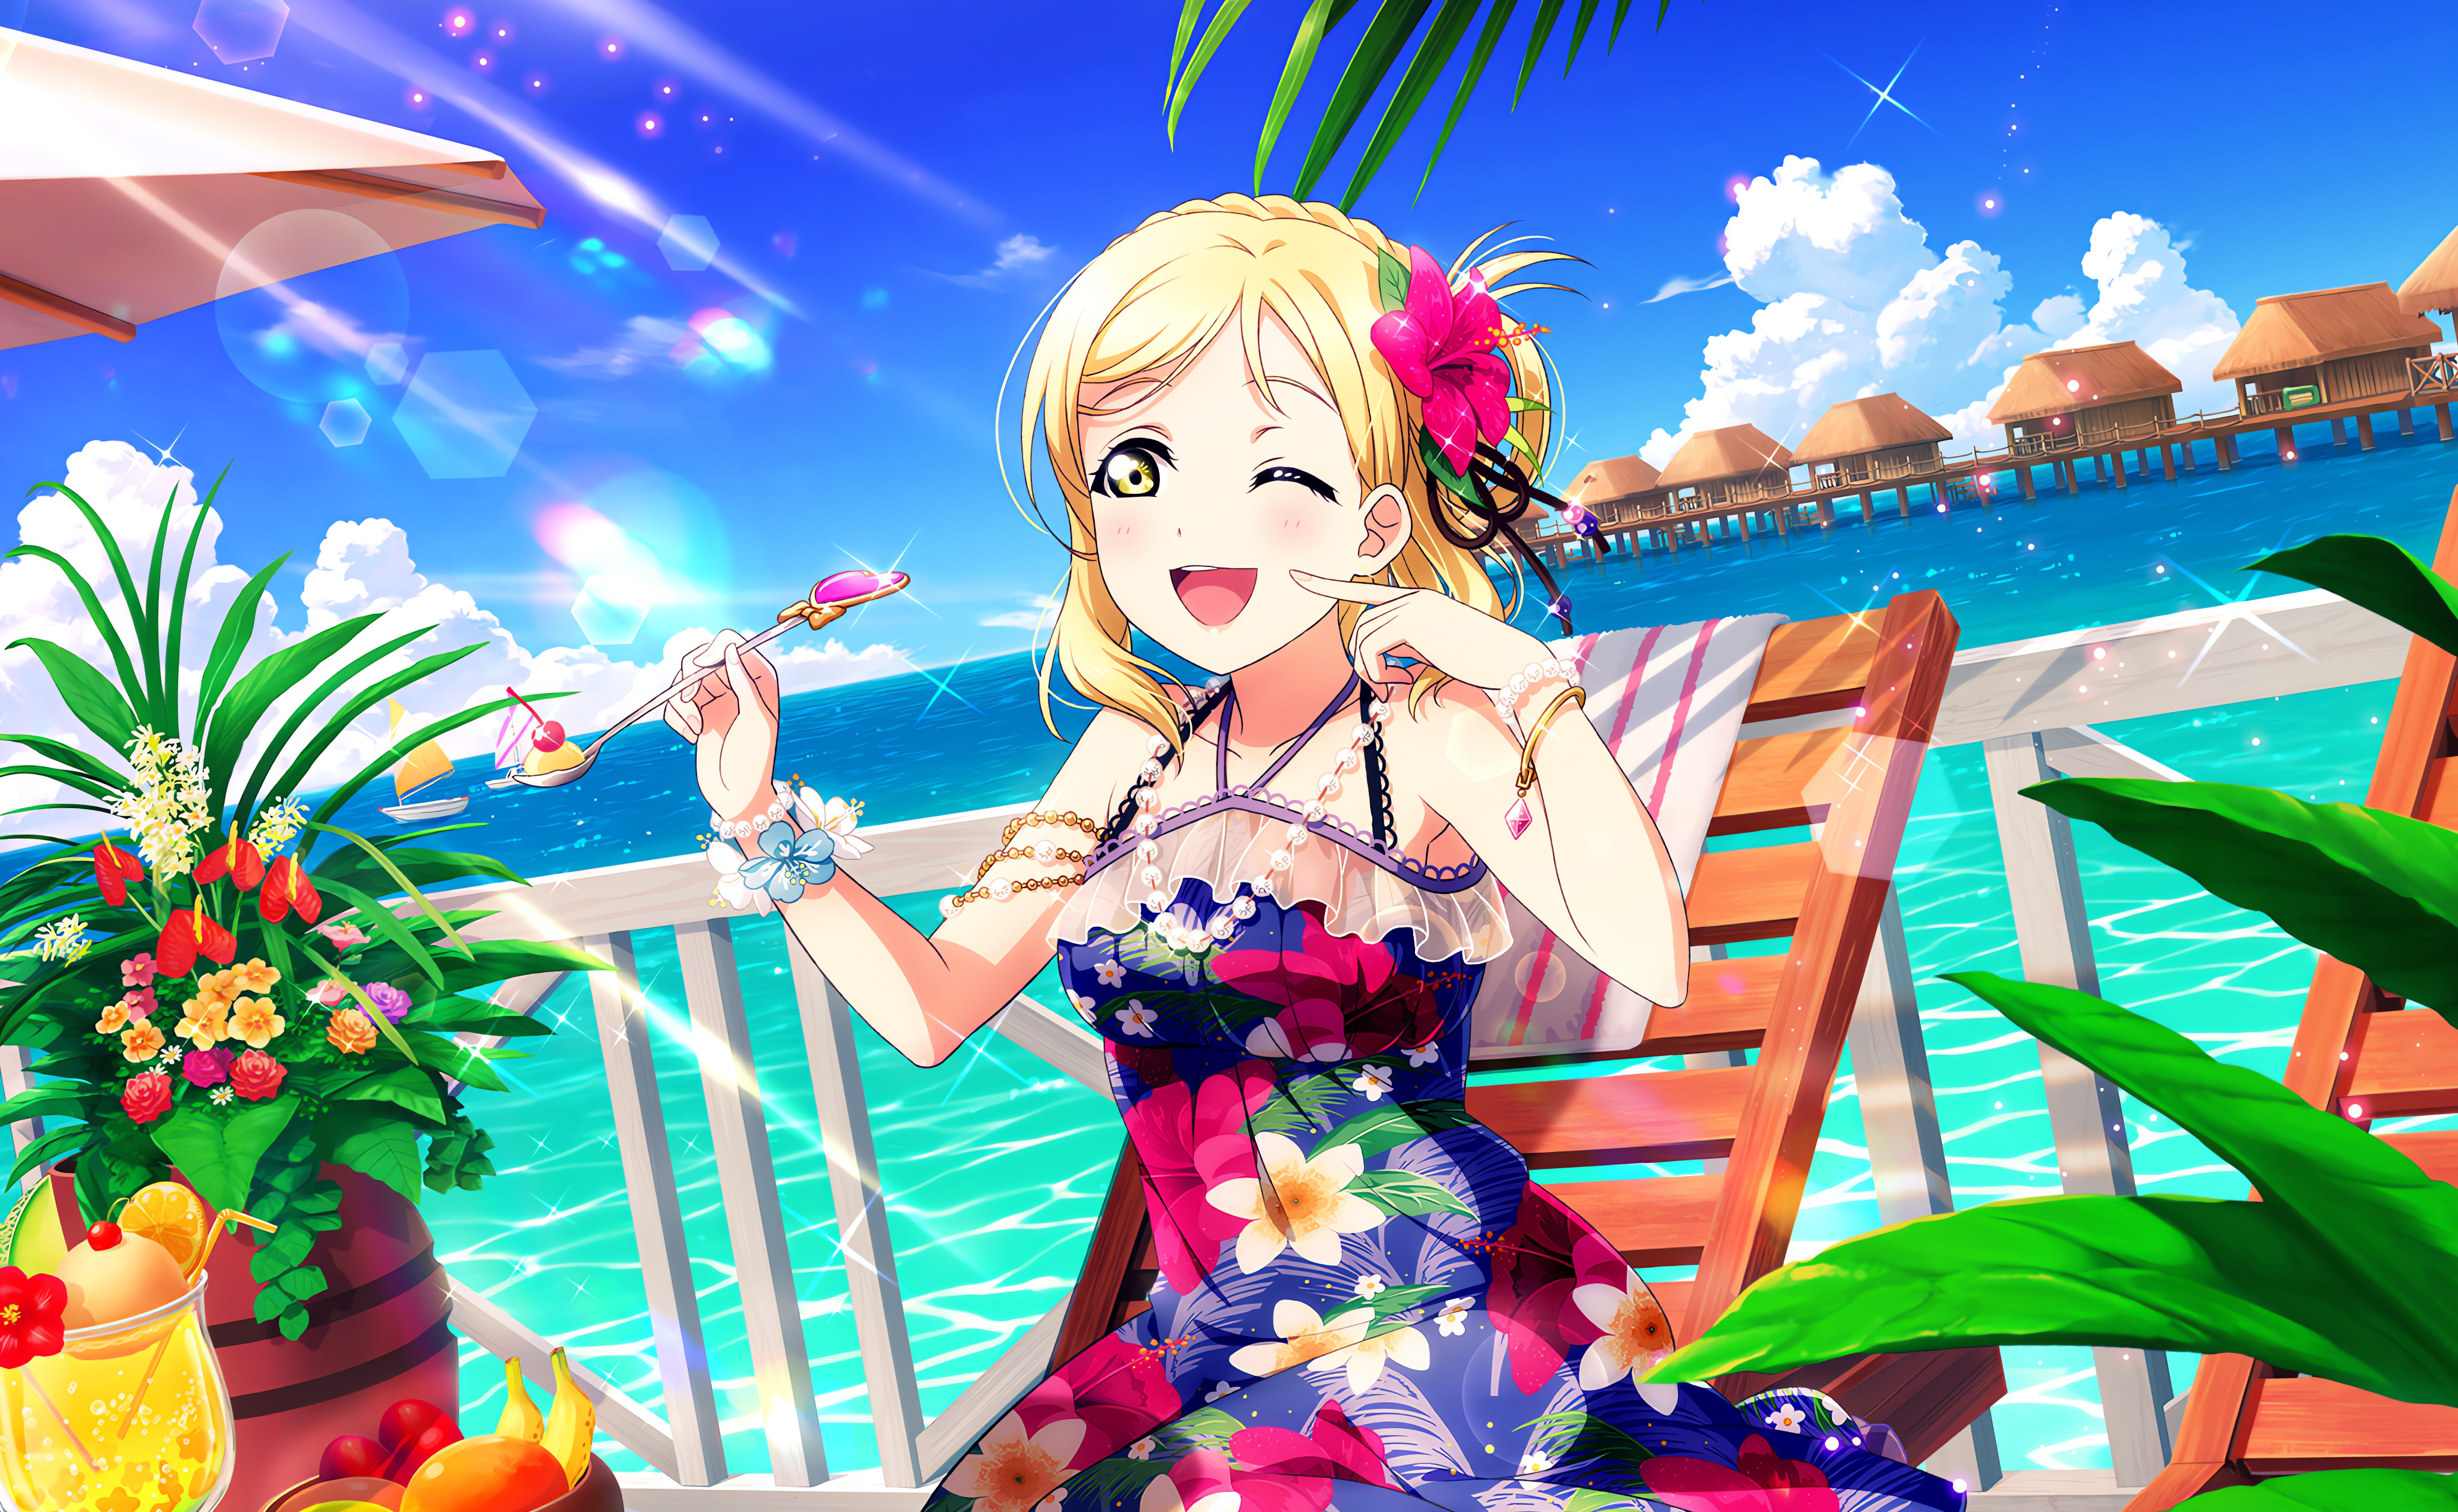 Anime 4096x2520 Ohara Mari Love Live! Love Live! Sunshine anime anime girls clouds sky sunlight leaves flowers one eye closed blushing flower in hair spoon drink fruit food water sitting bracelets pearl necklace stars